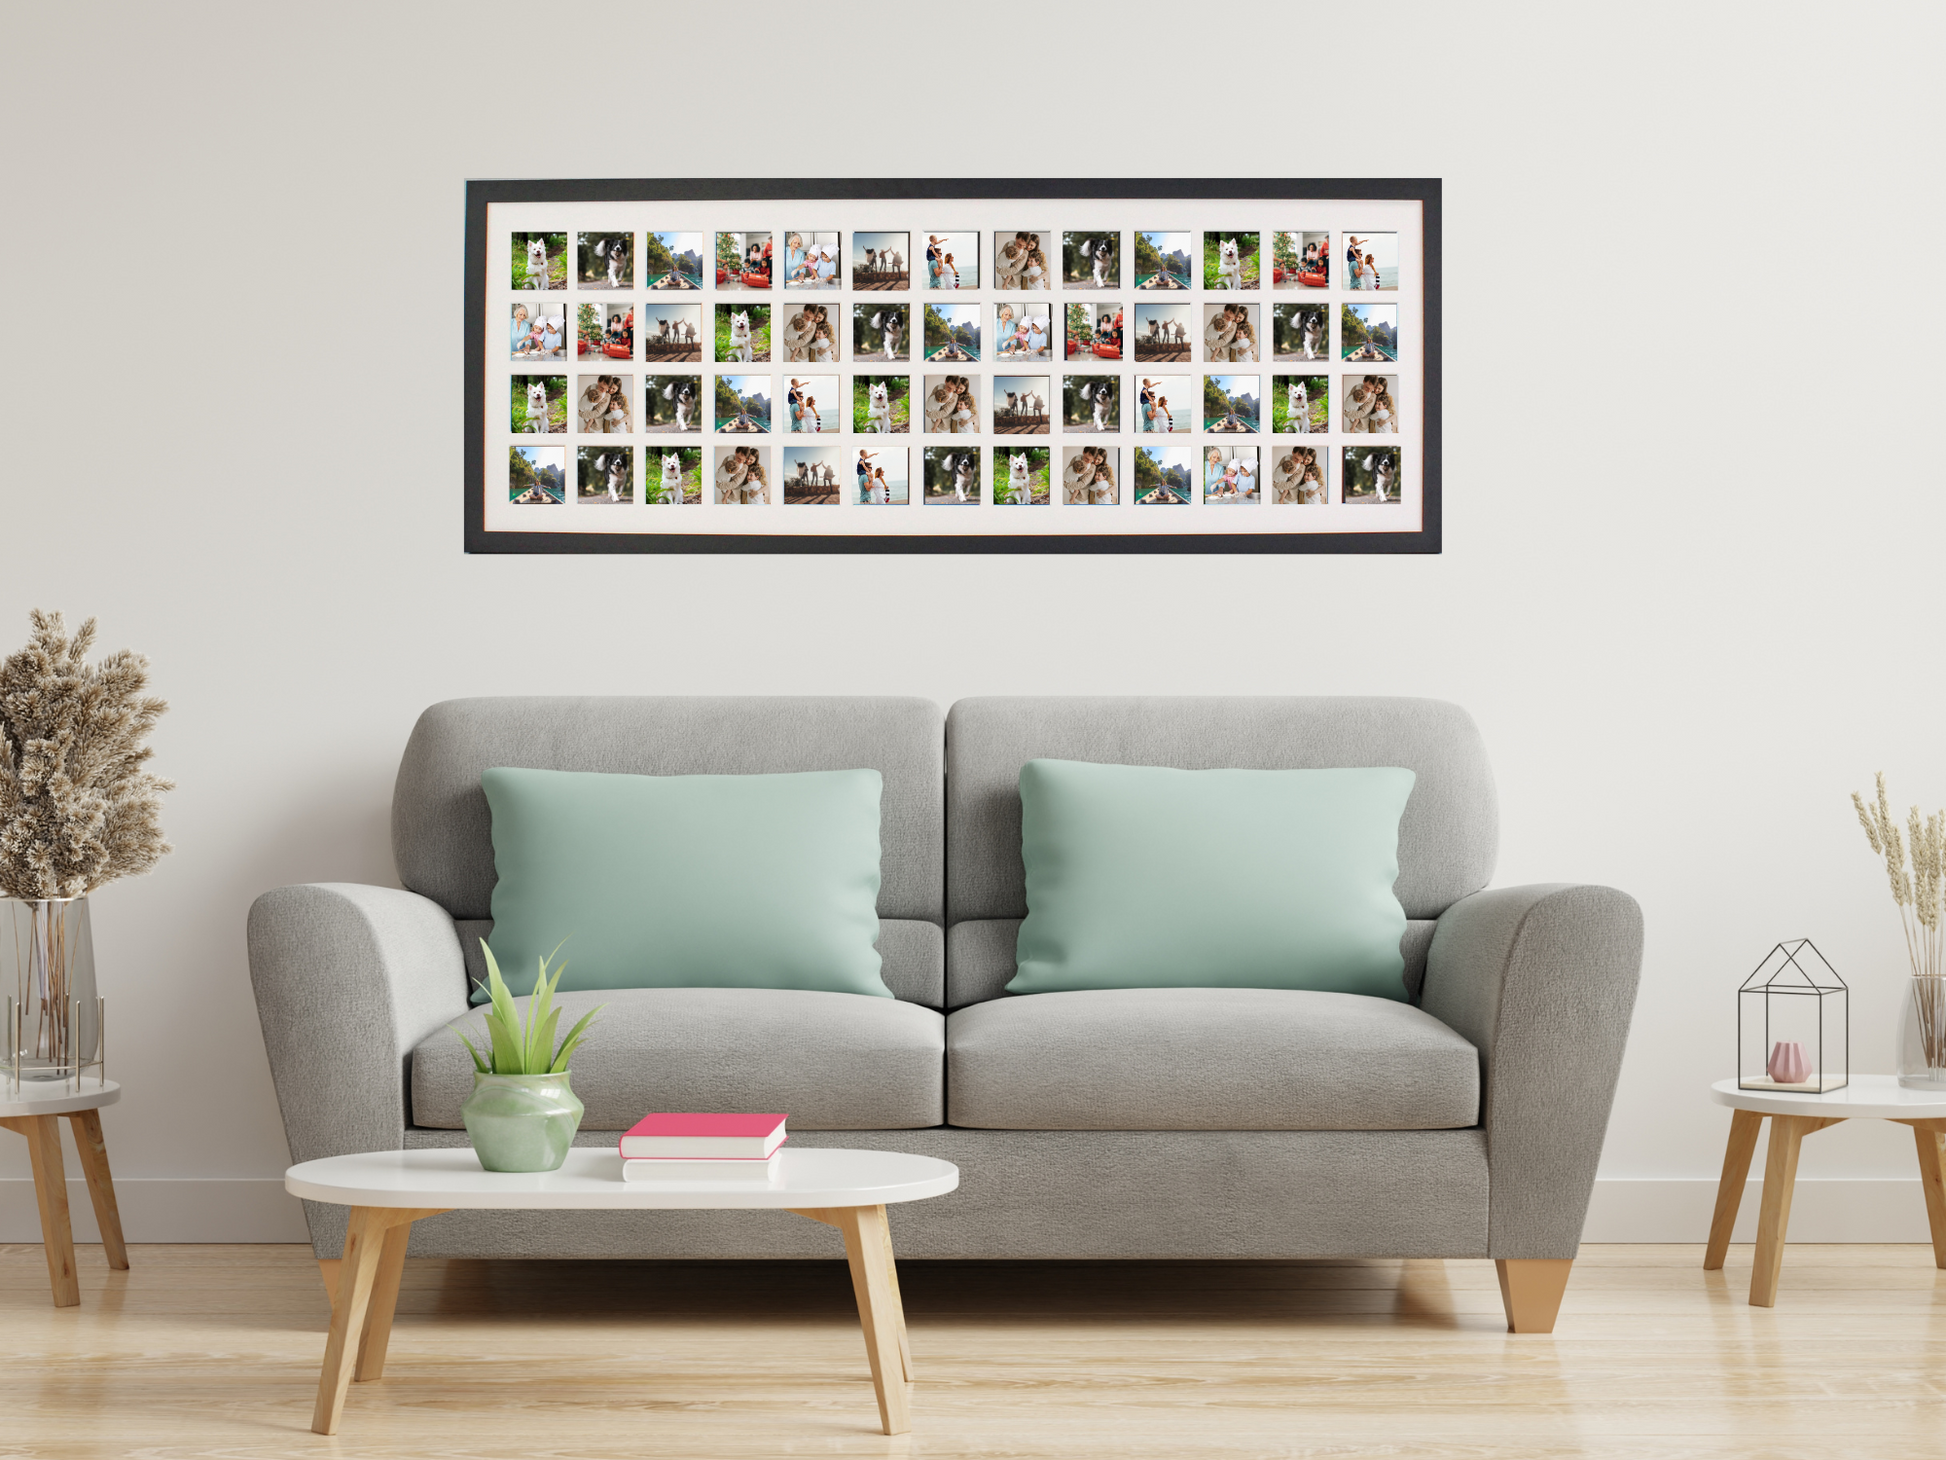 Square Multi Aperture Photo Frame. Capture a photo every week for a year! Suits 52 2.5x2.5inch Photos. 35x100 - PhotoFramesandMore - Wooden Picture Frames